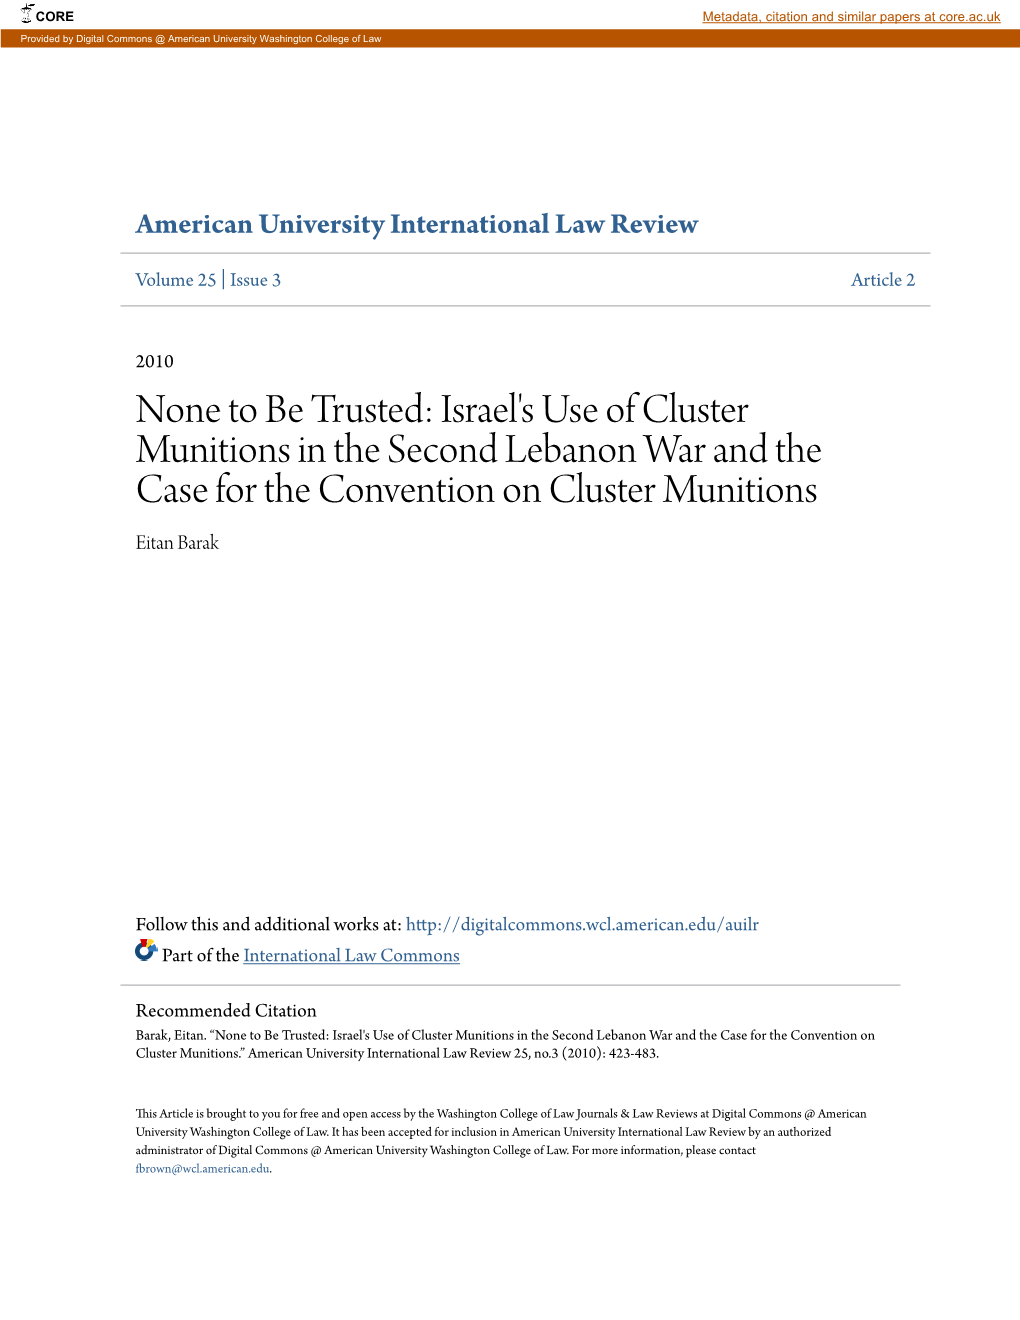 Israel's Use of Cluster Munitions in the Second Lebanon War and the Case for the Convention on Cluster Munitions Eitan Barak